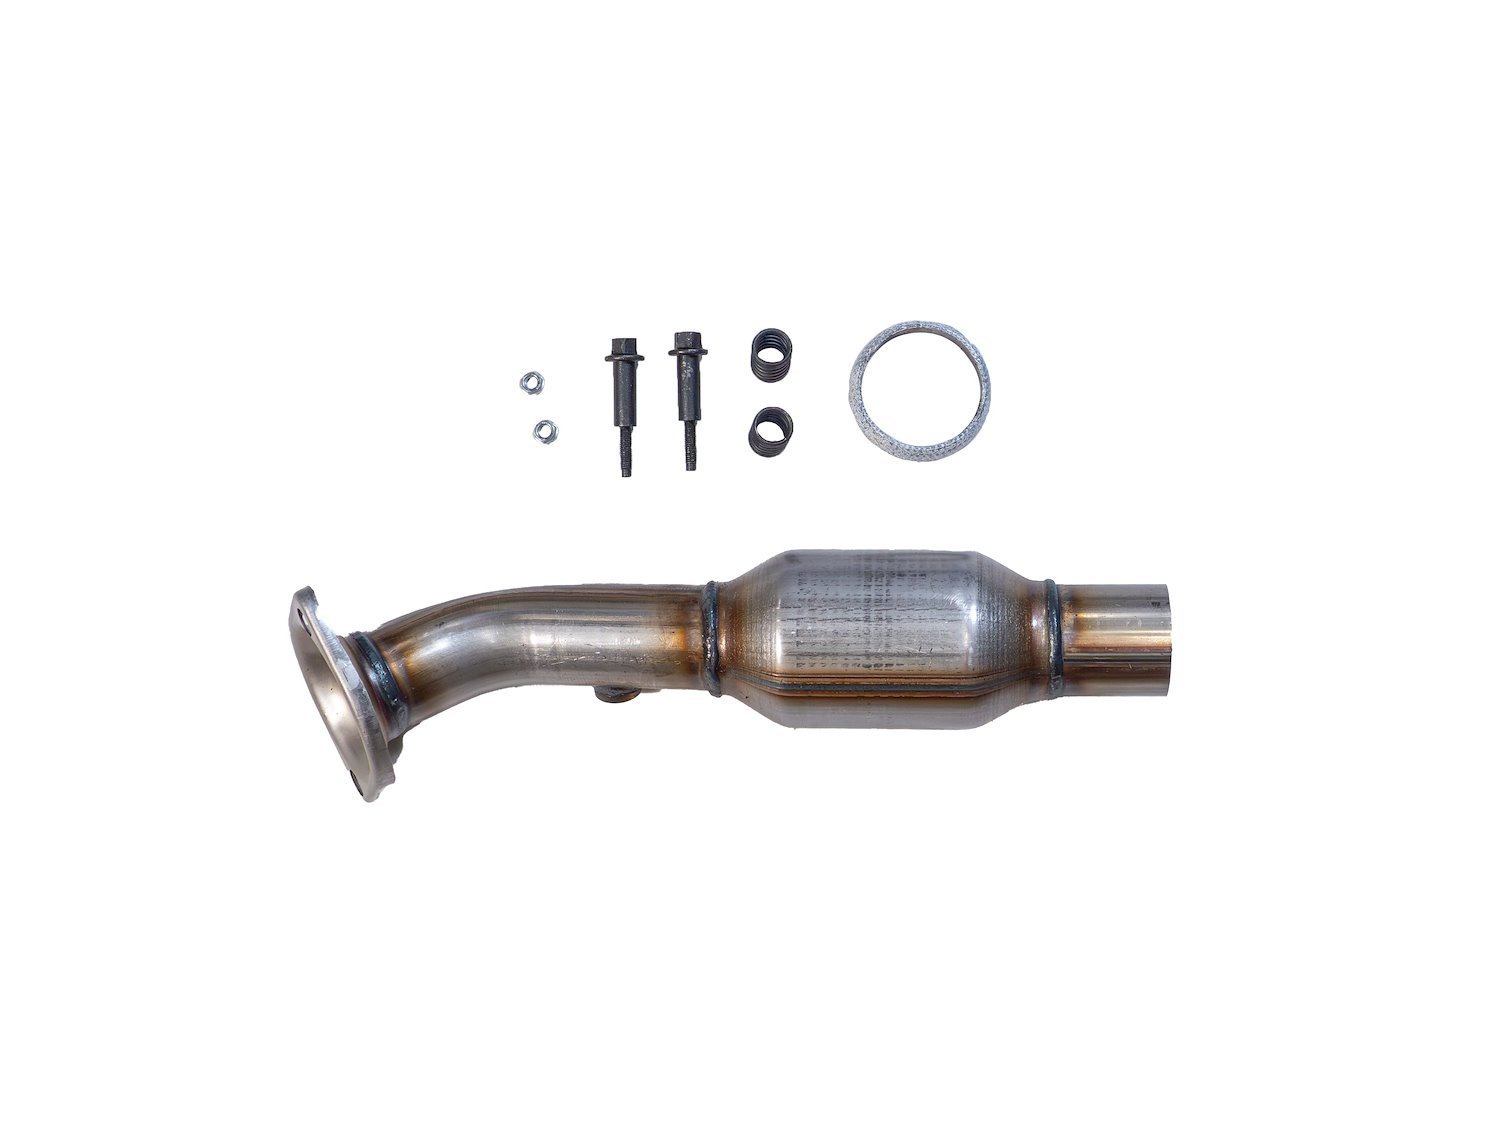 Catalytic Converter Fits 2016-2019 Toyota Prius AWDe, Prius V, Prius Prime w/1.8L 4 cyl. Eng. [Rear]